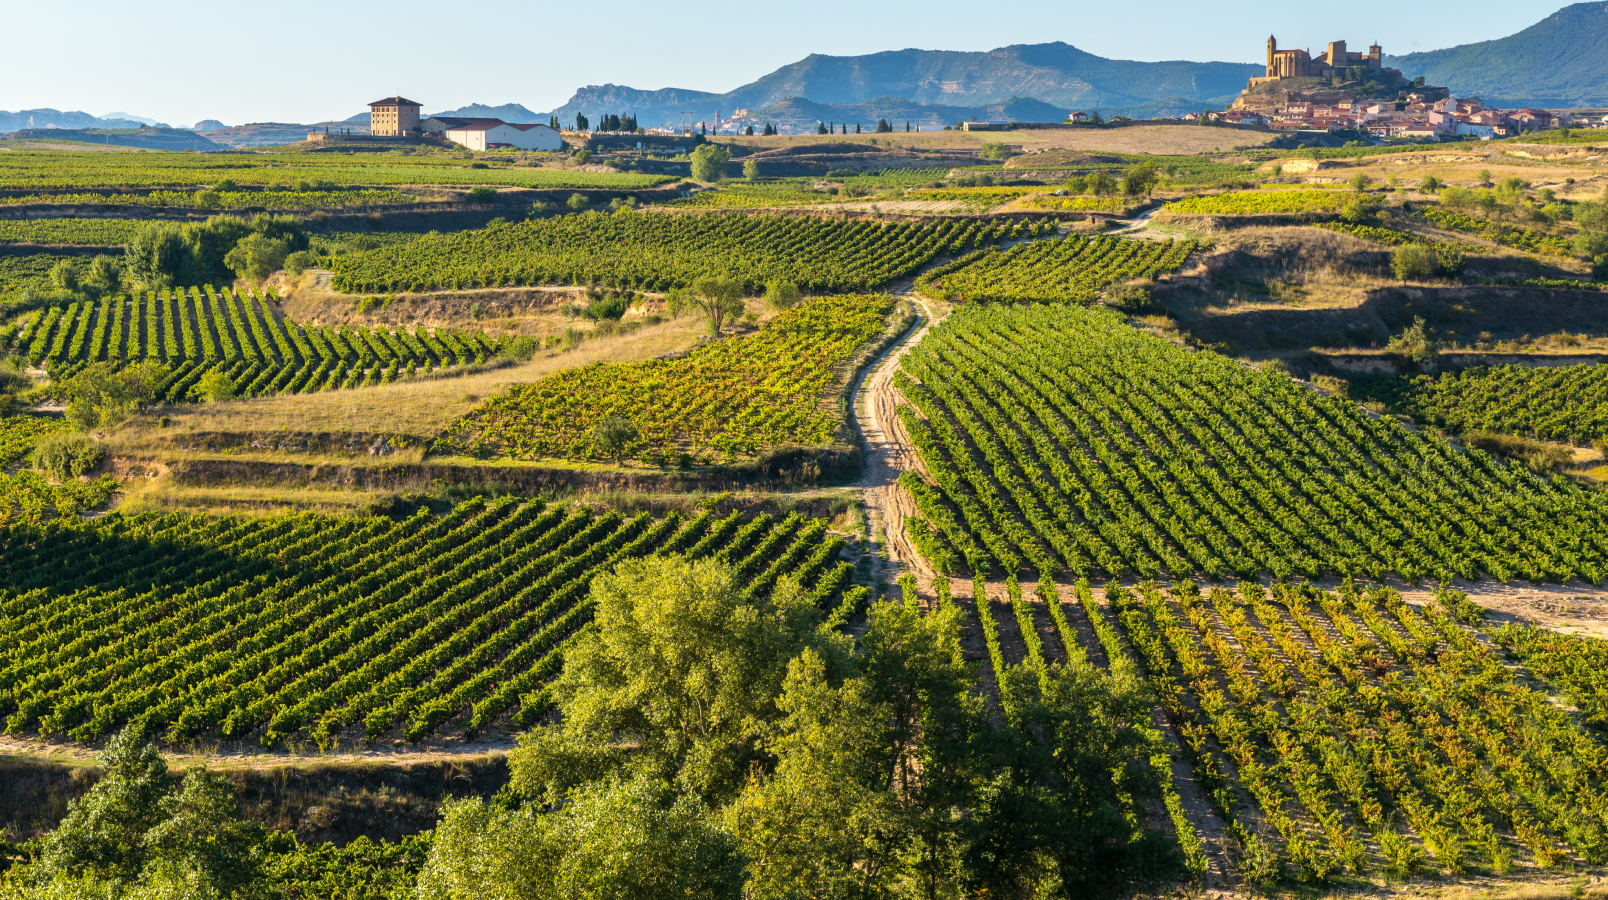 A Career Change with WSET - From London to Rioja